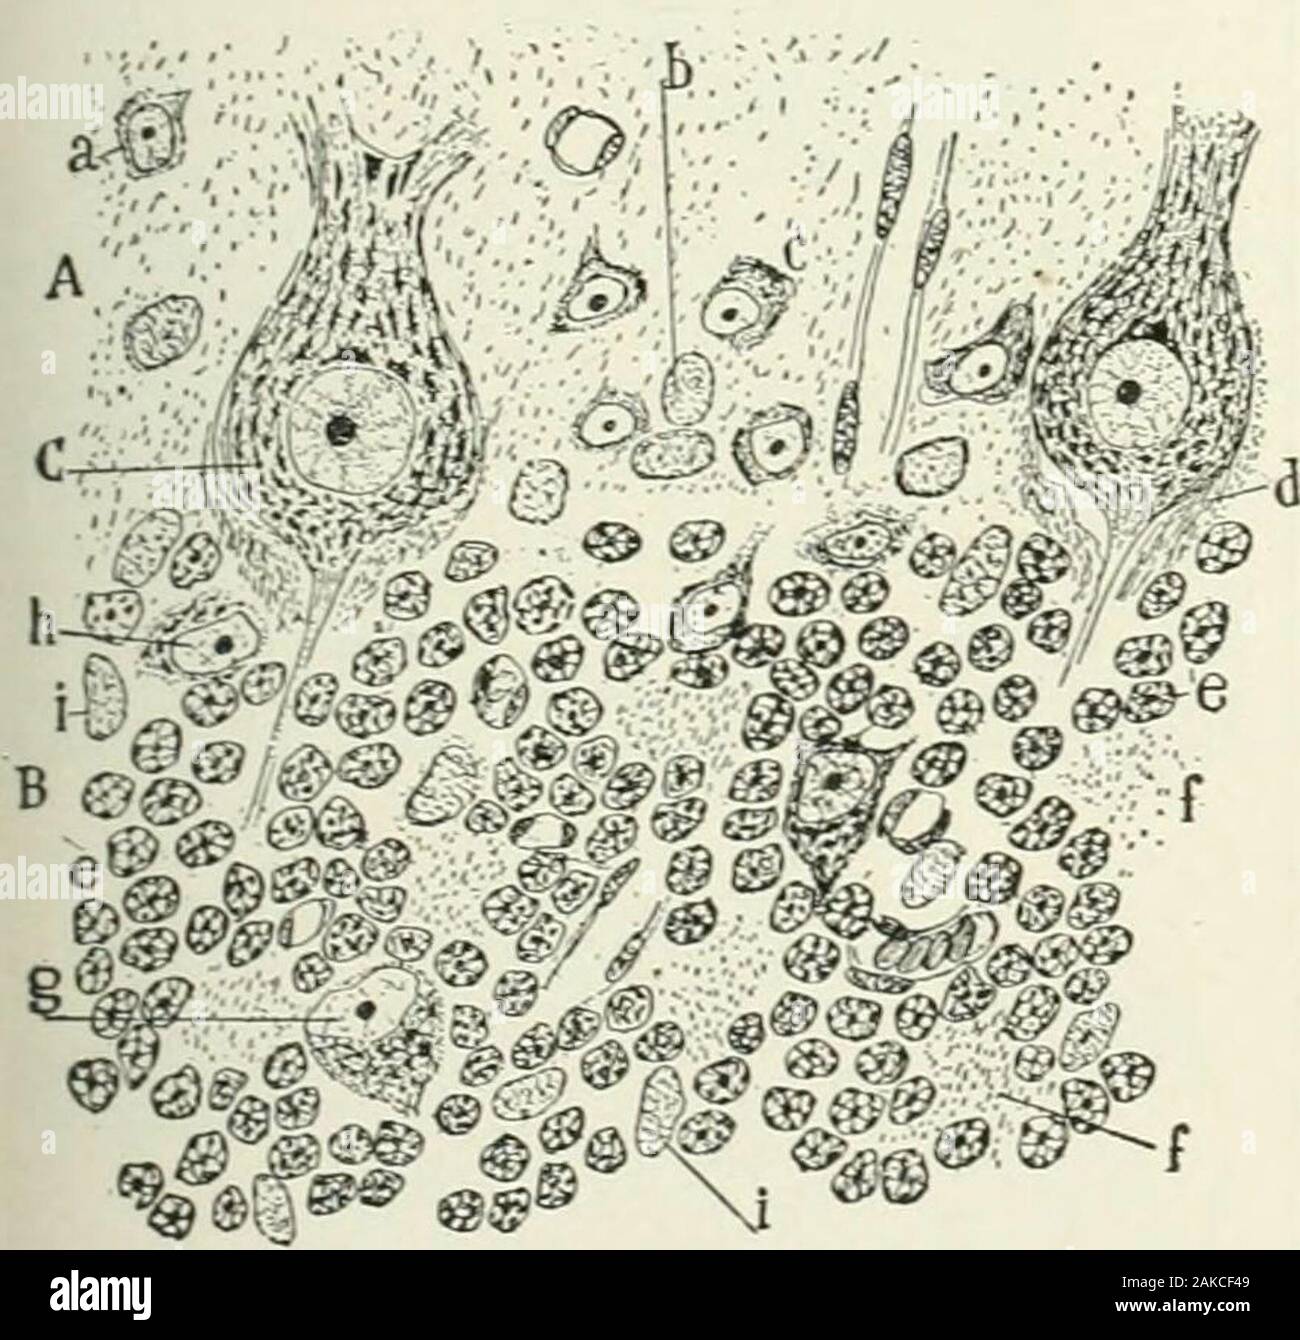 A reference handbook of the medical sciences, embracing the entire range of scientific and practical medicine and allied science . Fig. S61.—Cell from the Xuclexis CochlcarLi entralis of aCat. stained by Golgis Method. The cell body U surrounded by apericellular network beUeved to represent the terminals of axonesfrom other neurones. The network surrounds the whole cell anda dendrite passing upward. The fiber a corresponds to one ofthe thickened fibers of the neriis cochlearis described by Ramony Cajal and Held. (After Held.). Fig. 862.—Vertical Section Through the Adult Human Cere-bellar Co Stock Photo